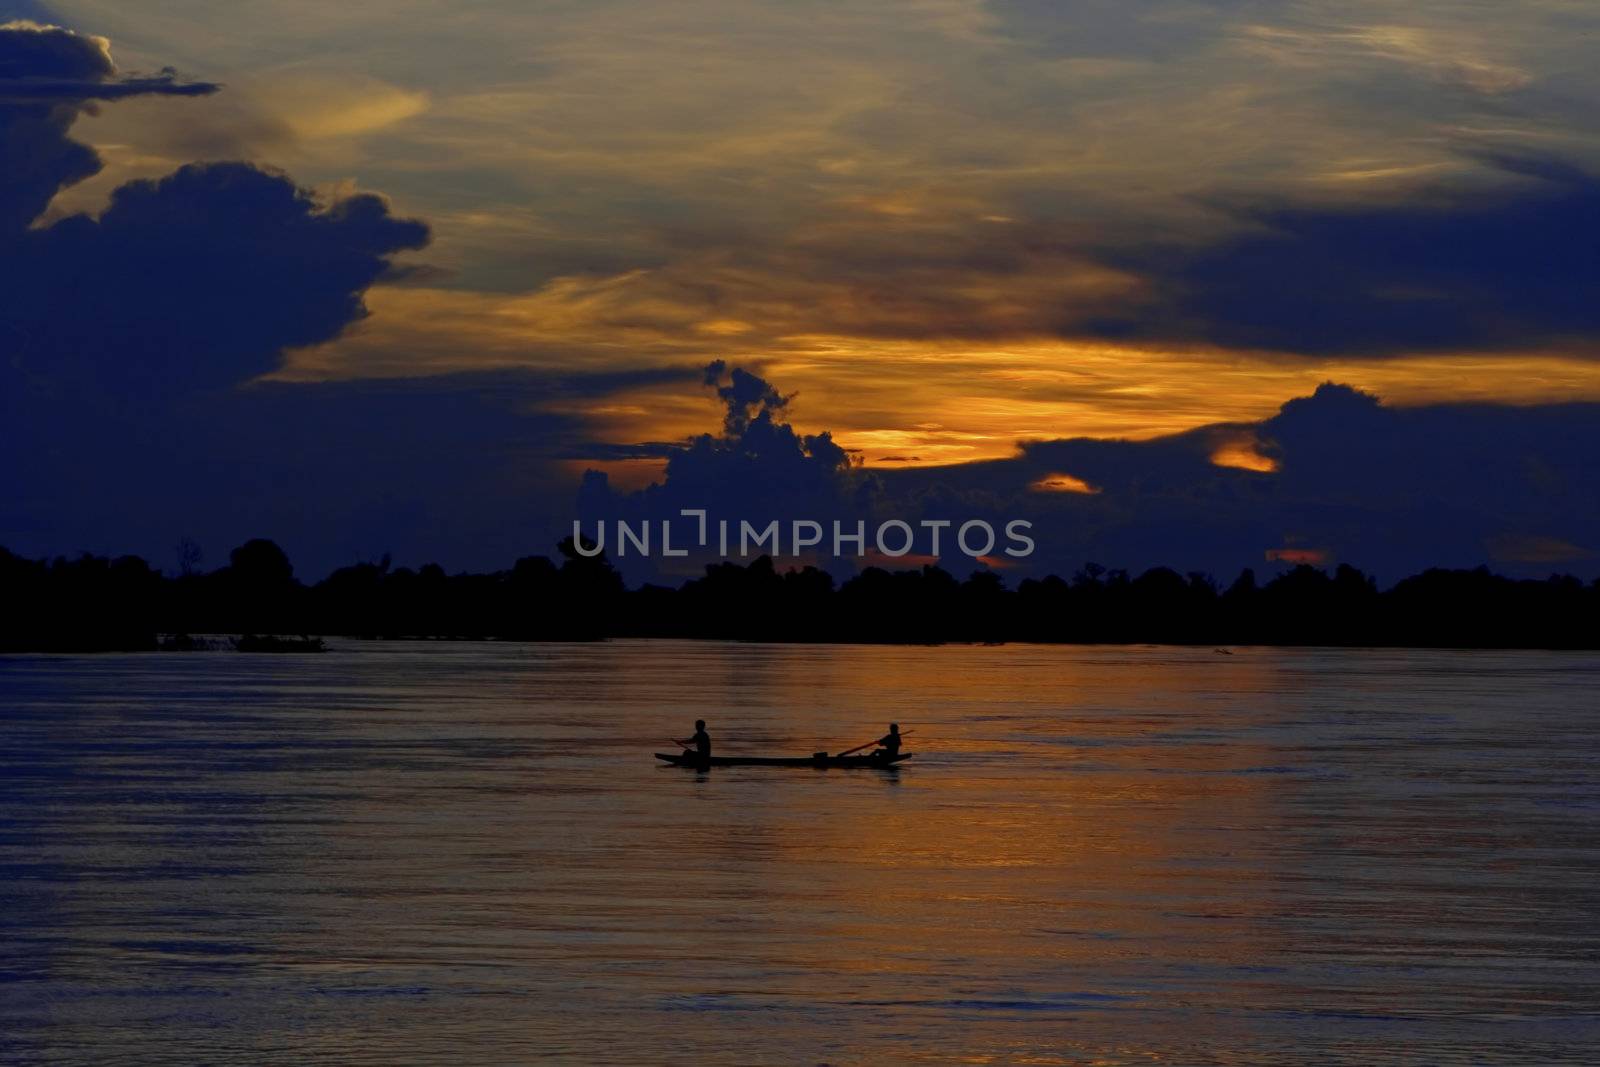 View over the Mekong river in Don Dhet - an area in Si Phan Don (also called four thousand islands)